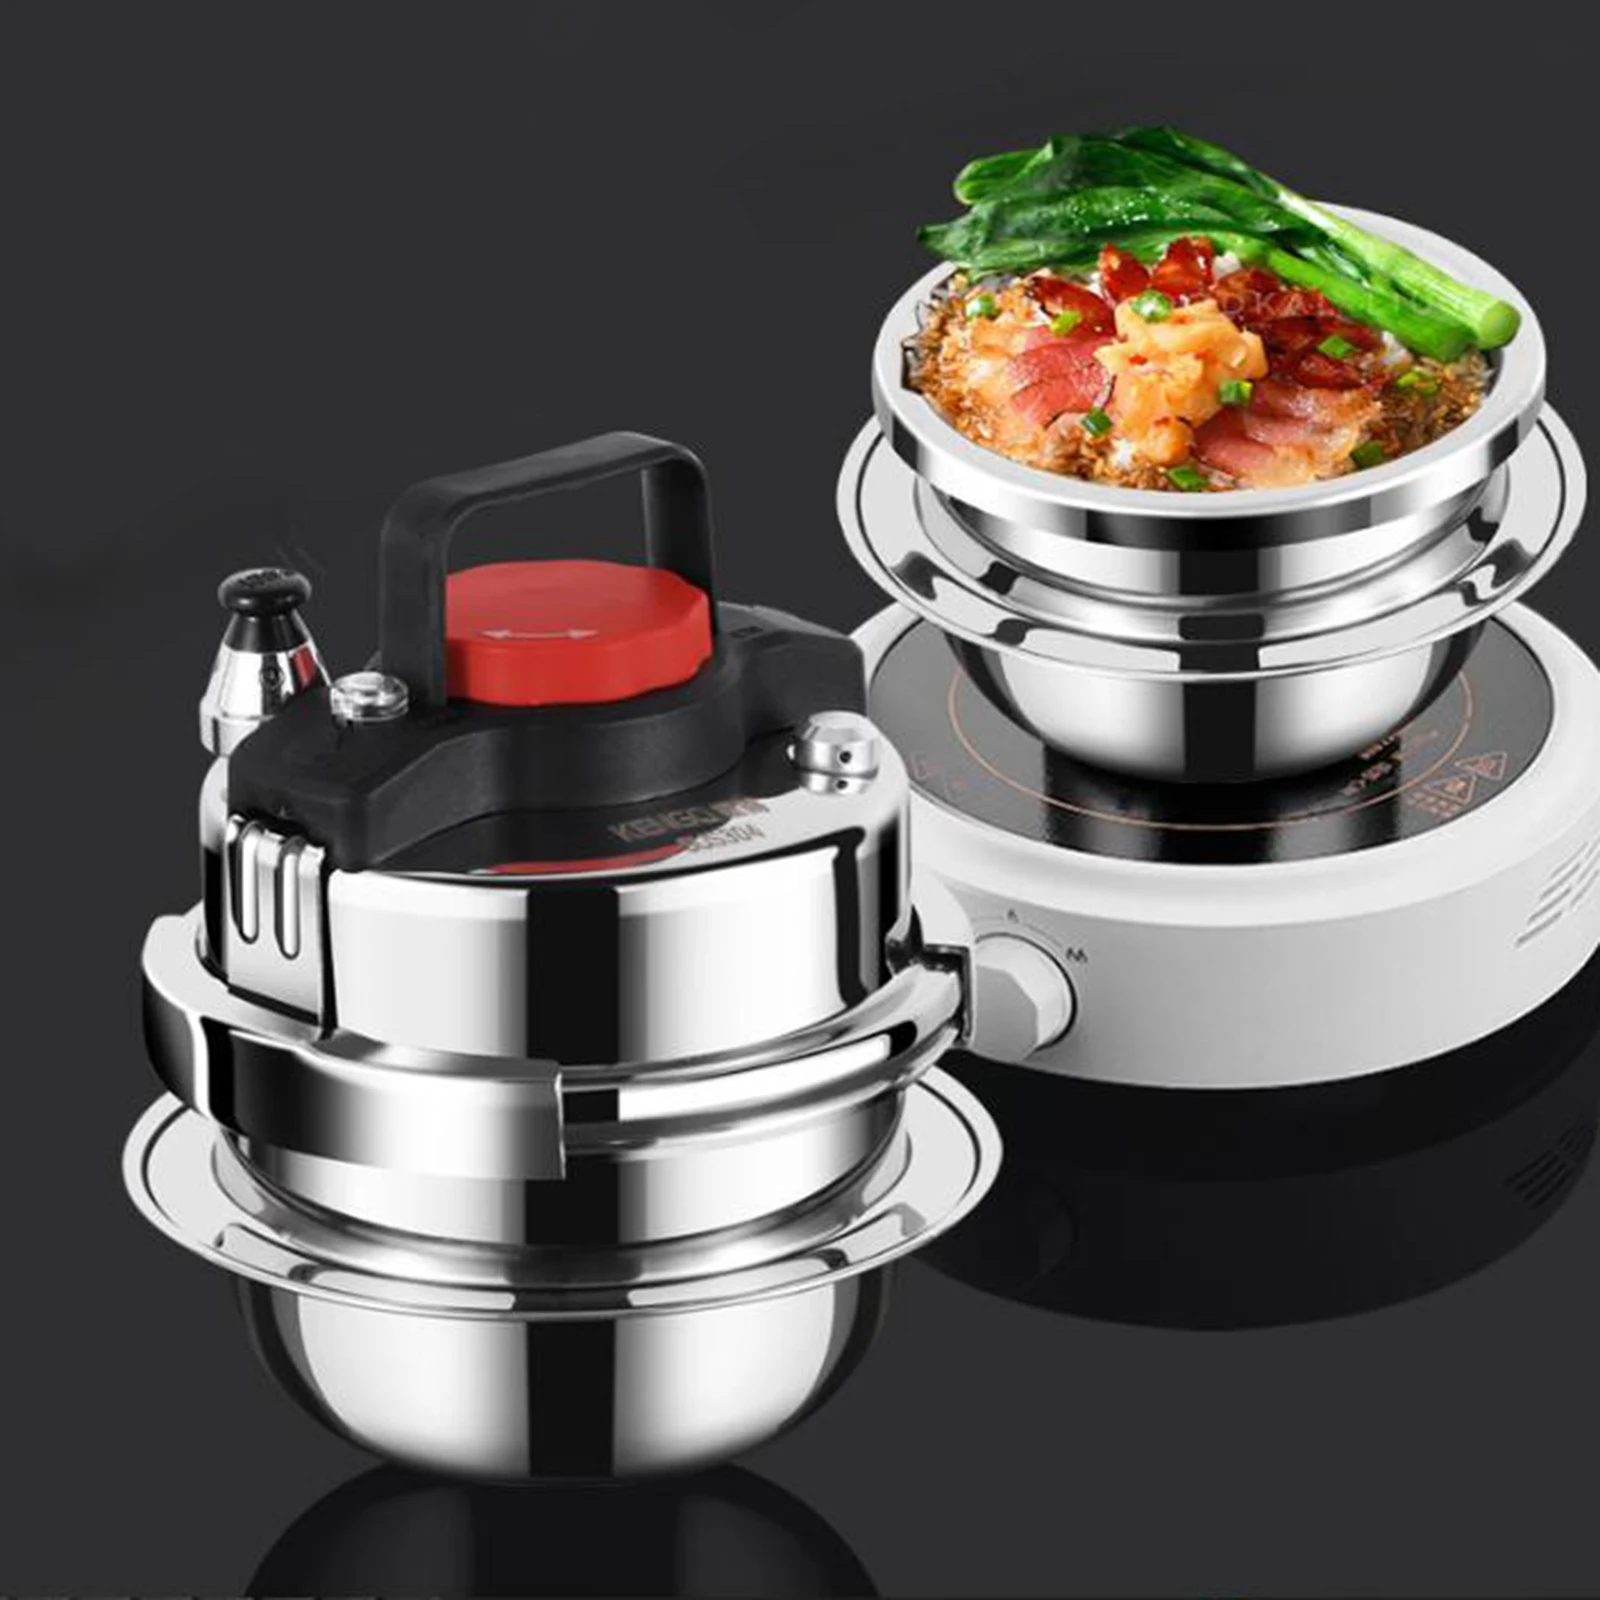 1.6L Outdoor Micro Pressure Cooker Kitchen Mini Cookware Cooking